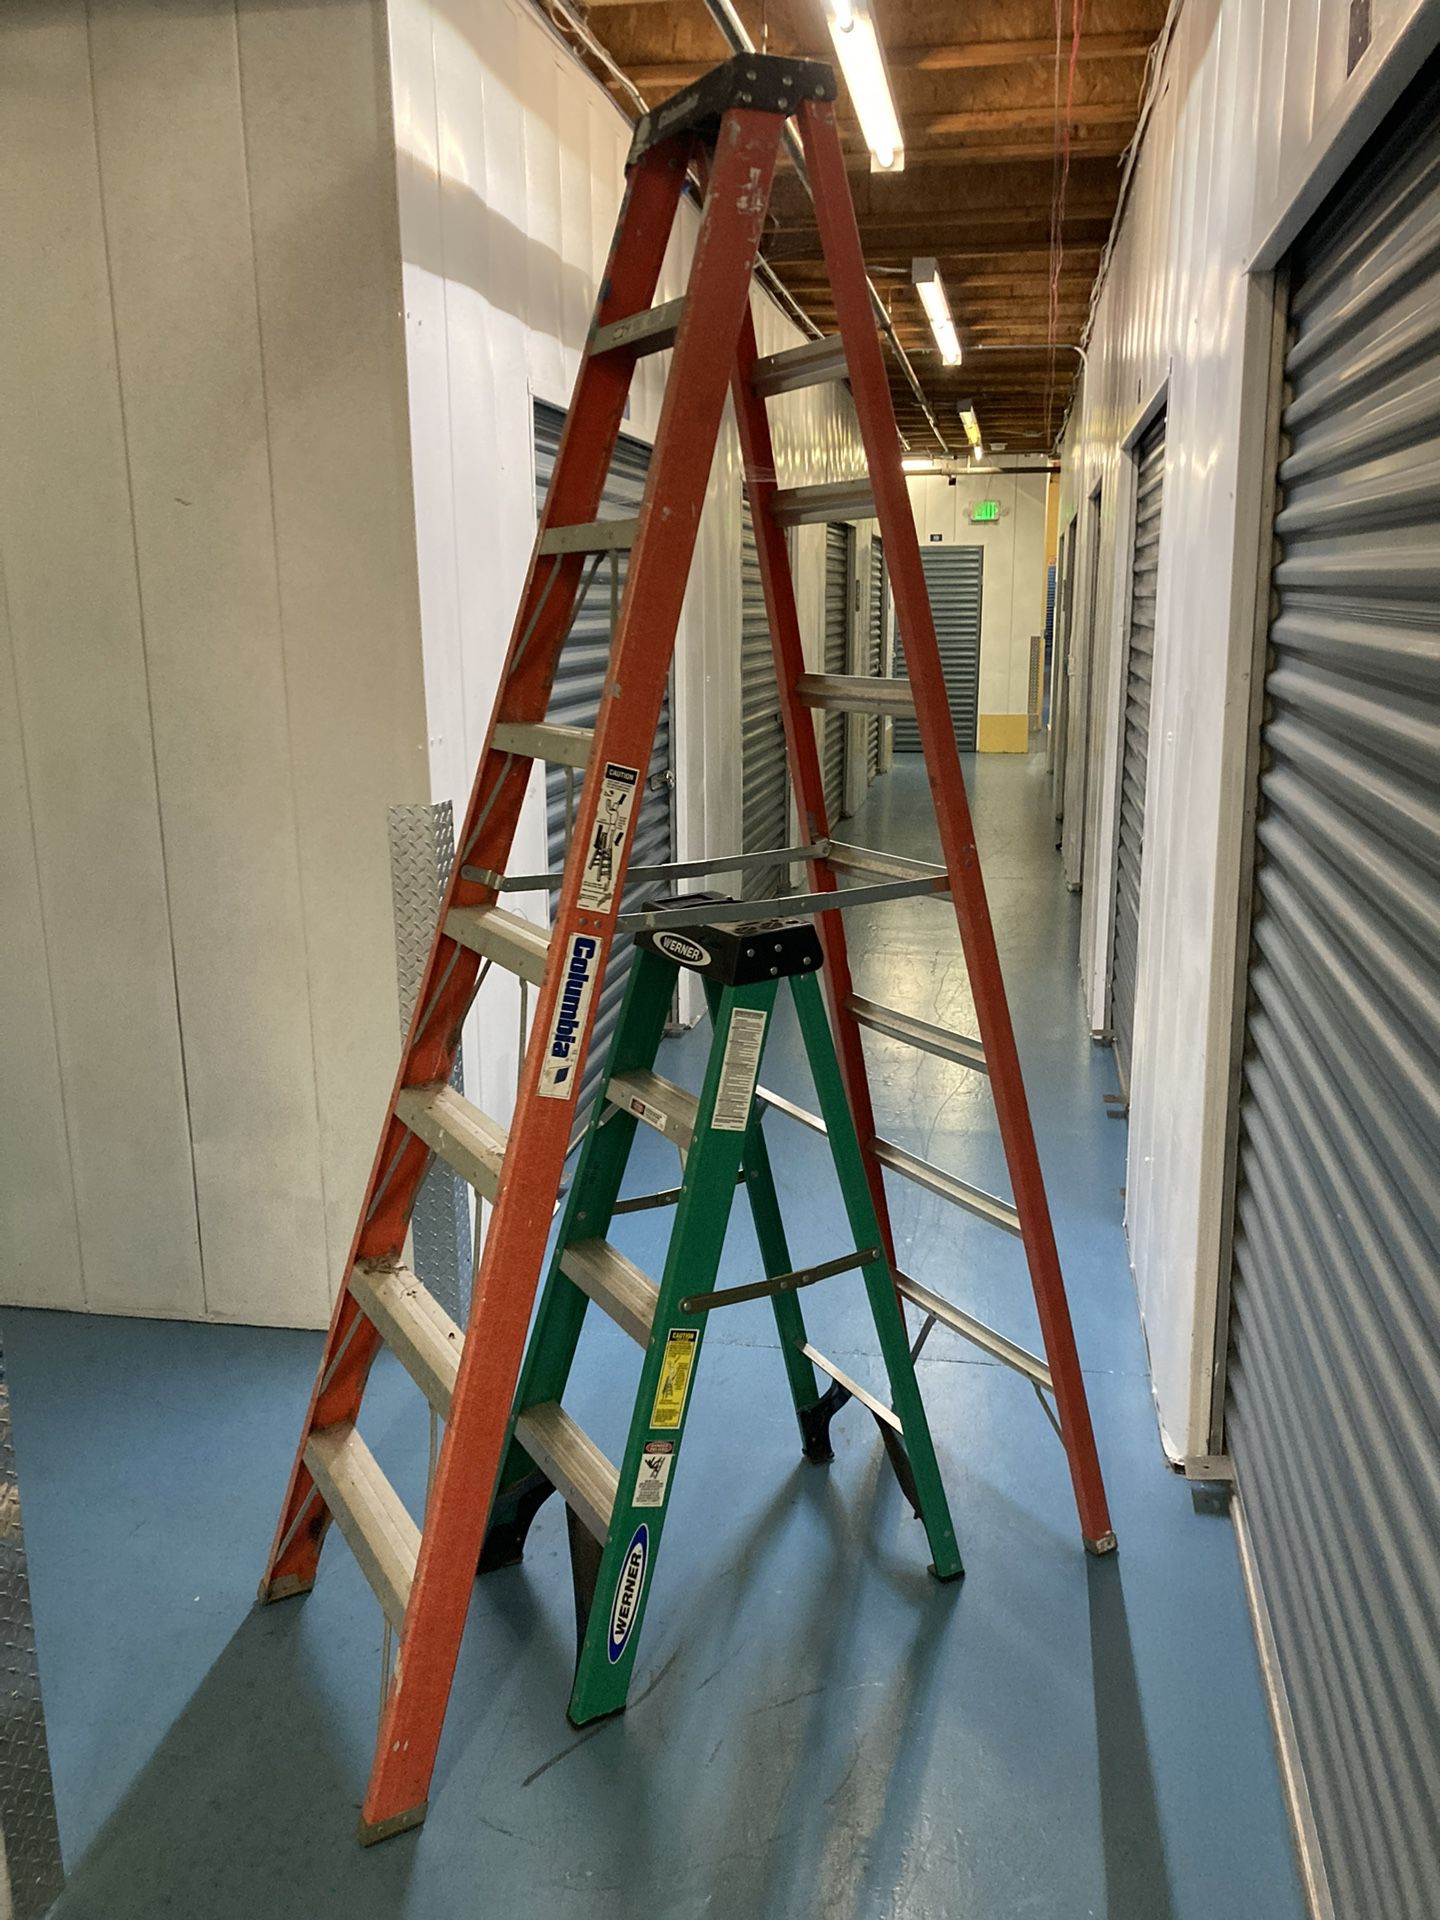 4’, 5’, and 8’ Ladder